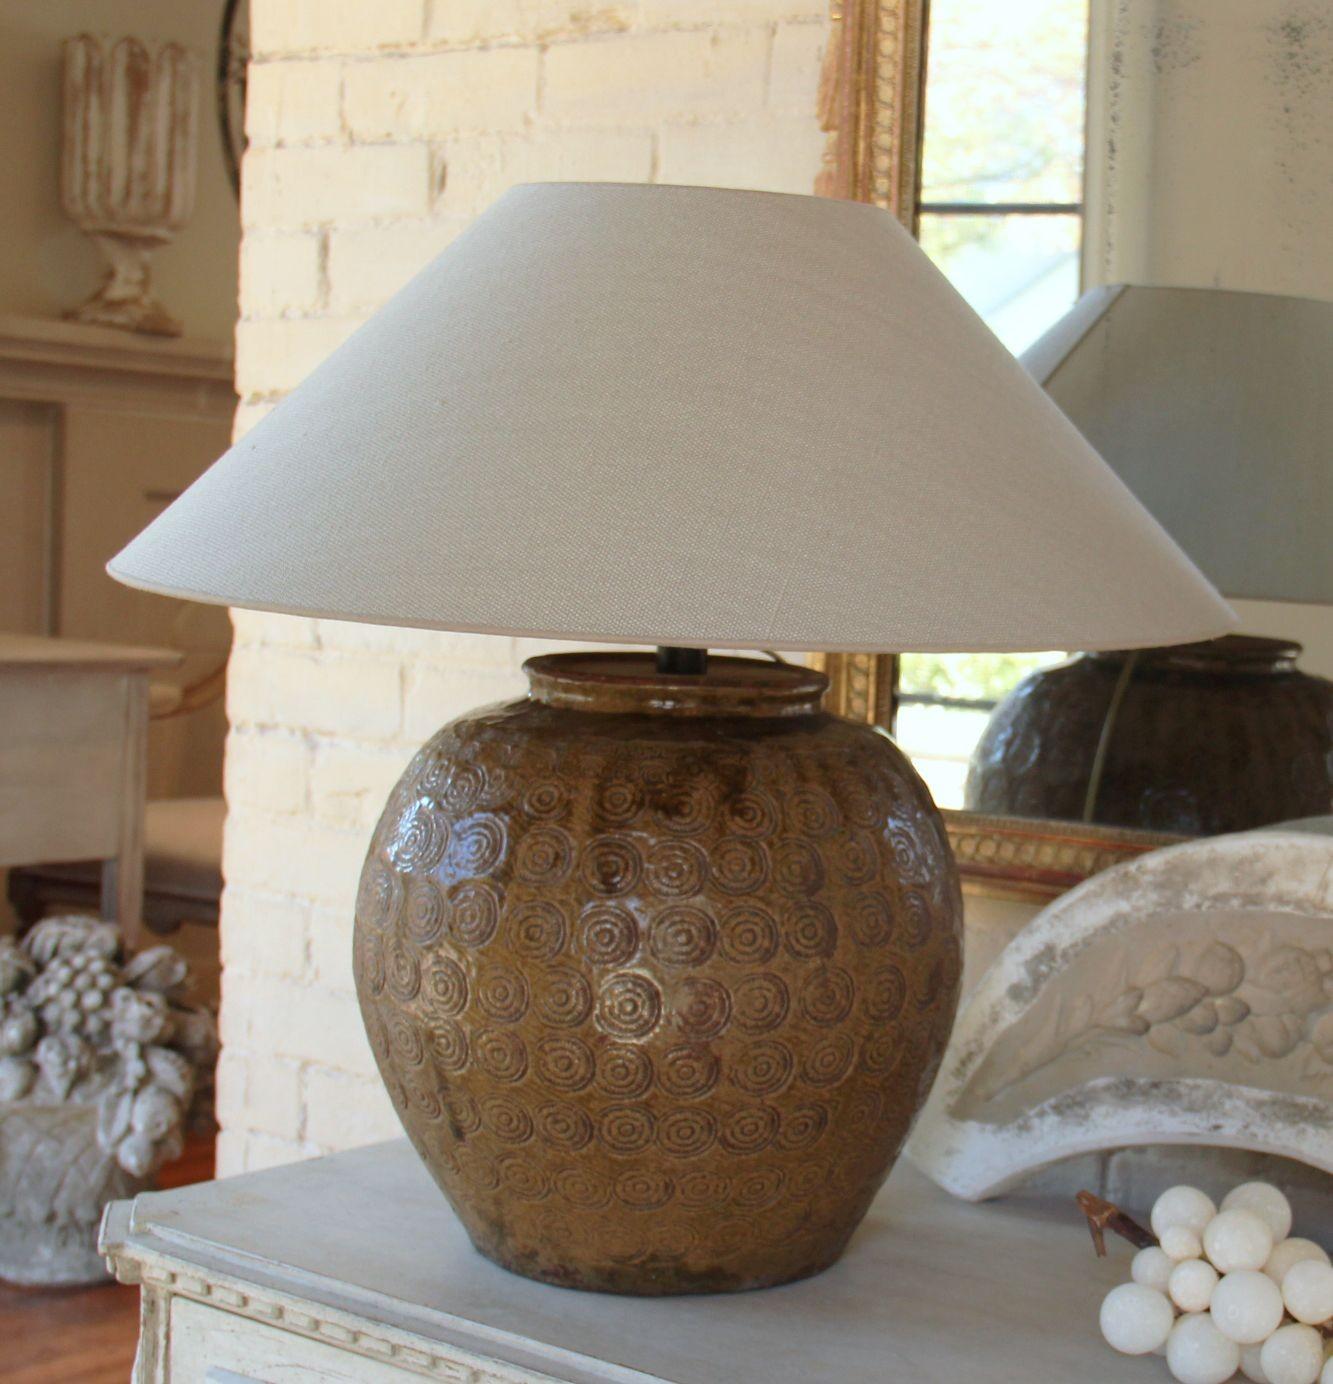 A Chinese Ming Dynasty ceramic vase that has been mounted as a table lamp. The vase has a beautiful amber glaze and coin shell pattern. The greige colored lampshade is handmade in Belgium of fine linen and has a high-quality gold foil inner lining.